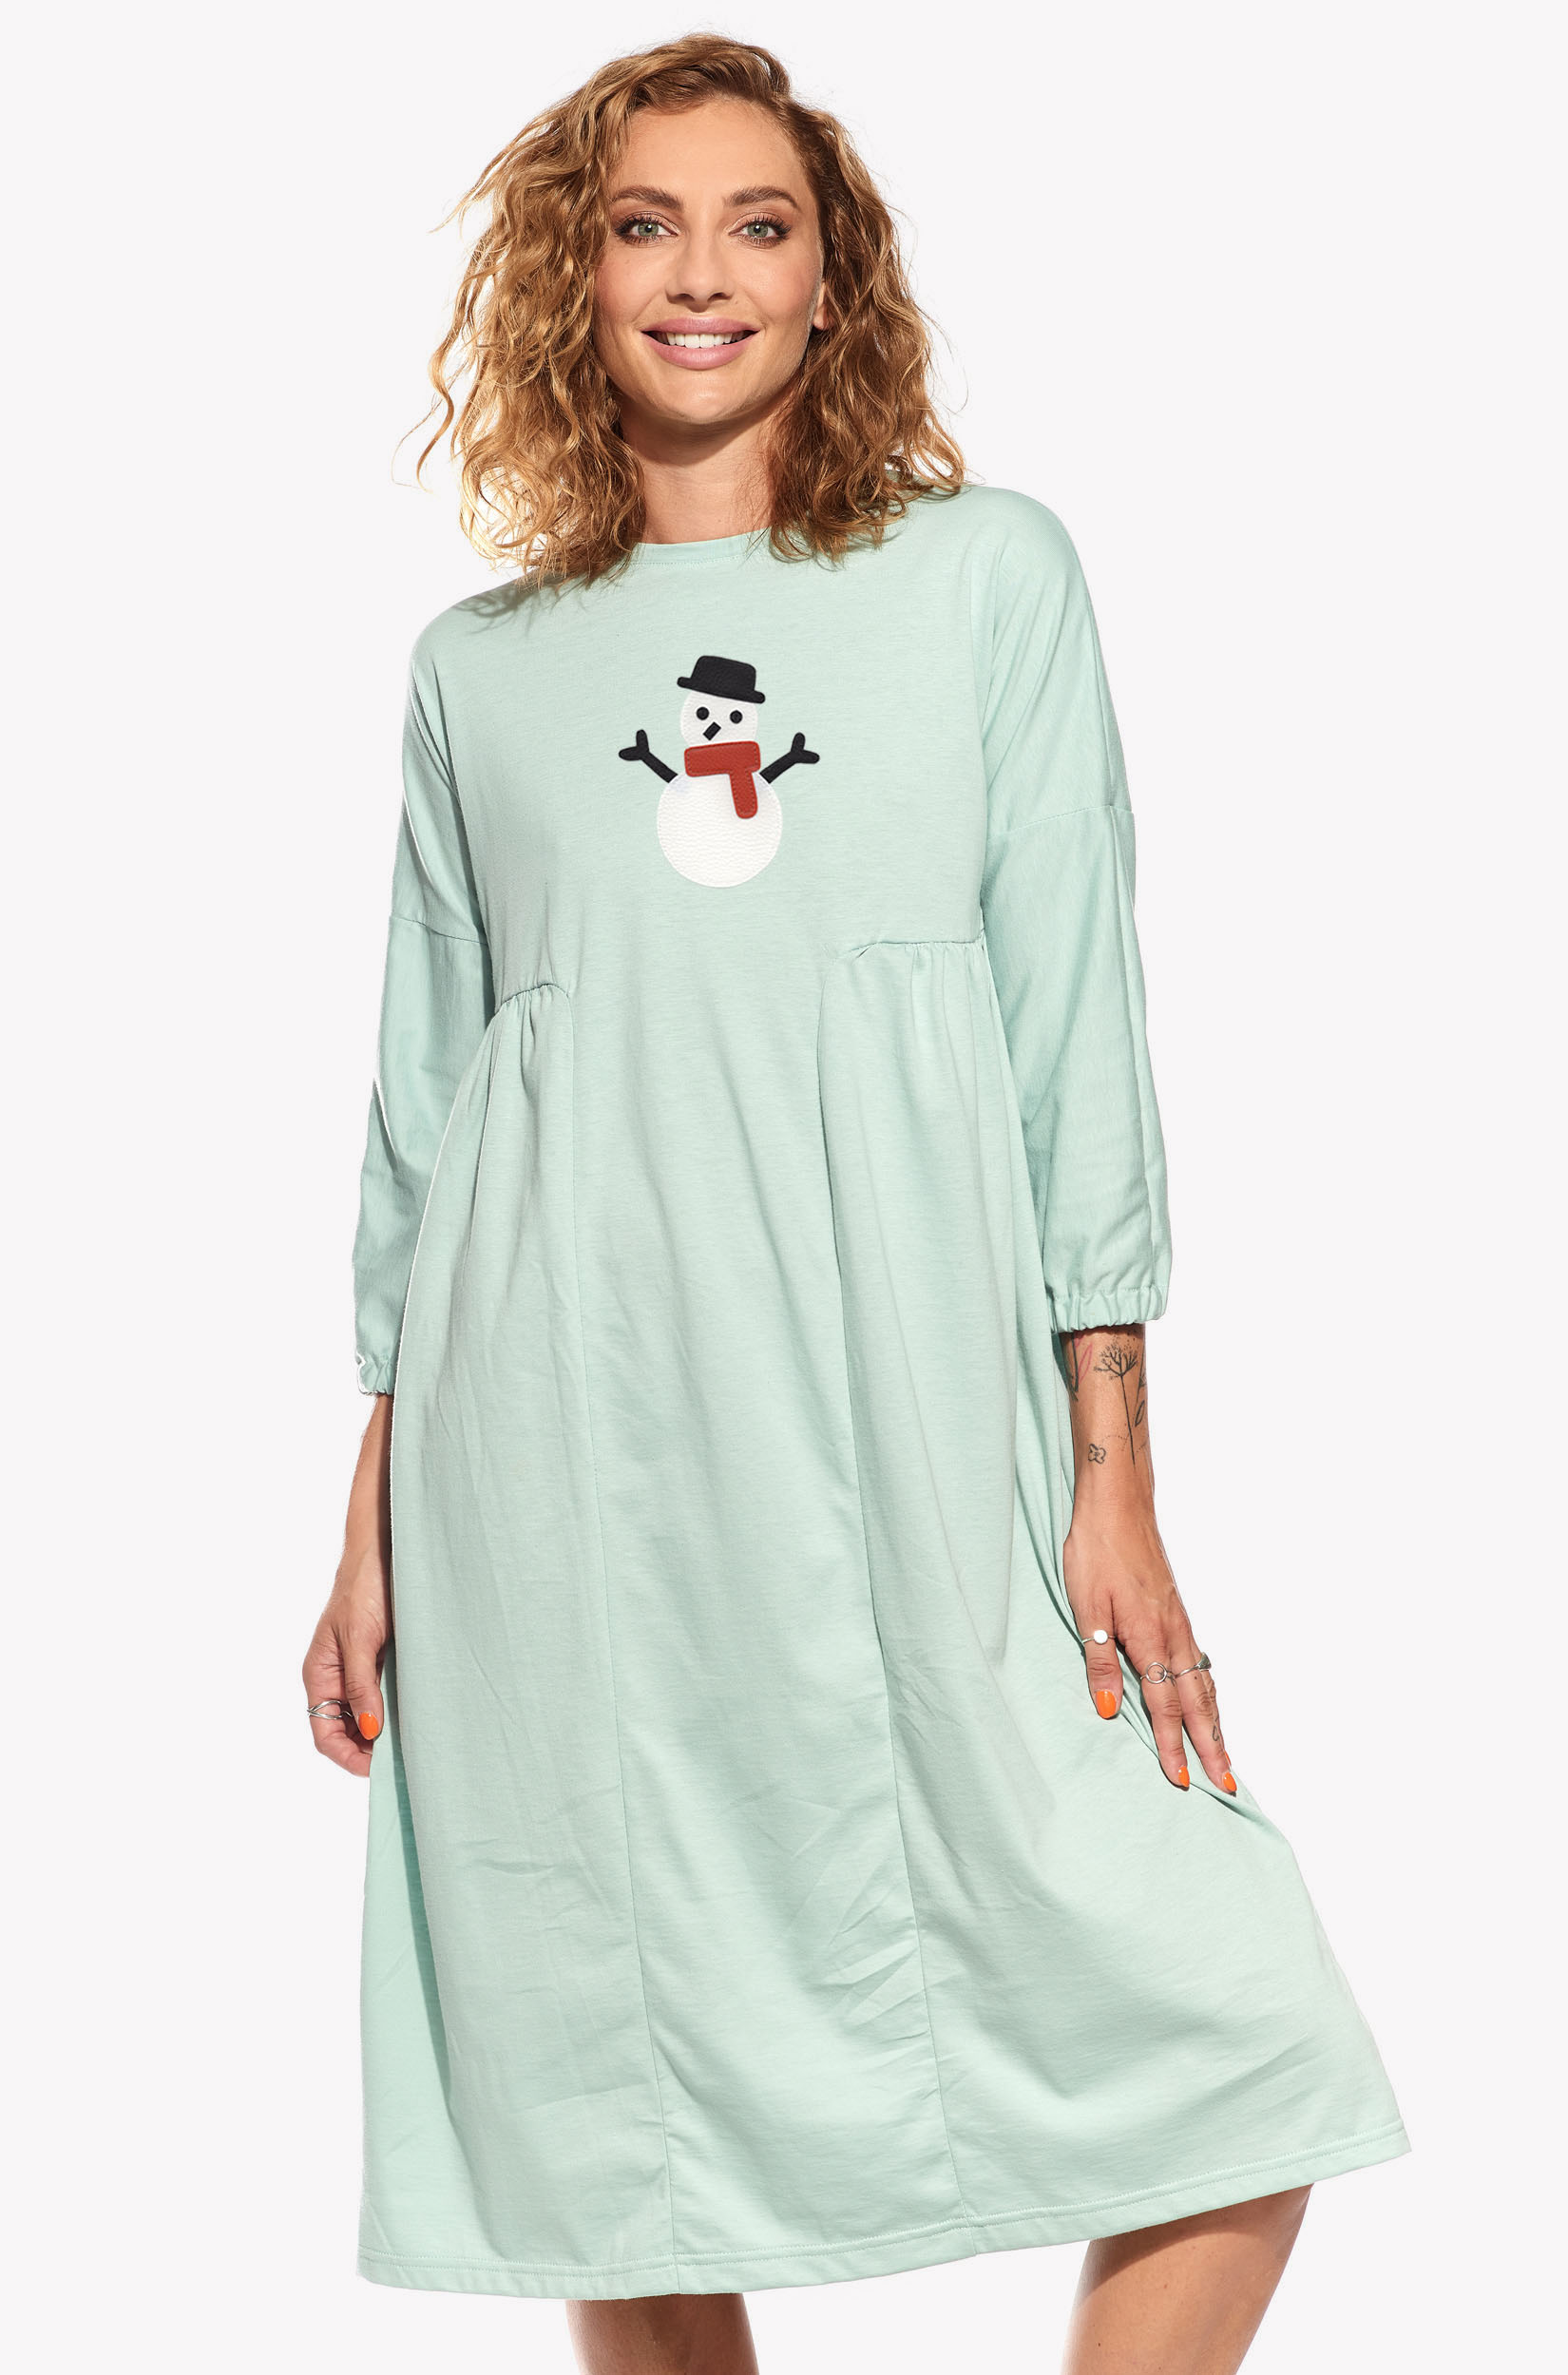 Dresses with a snowman